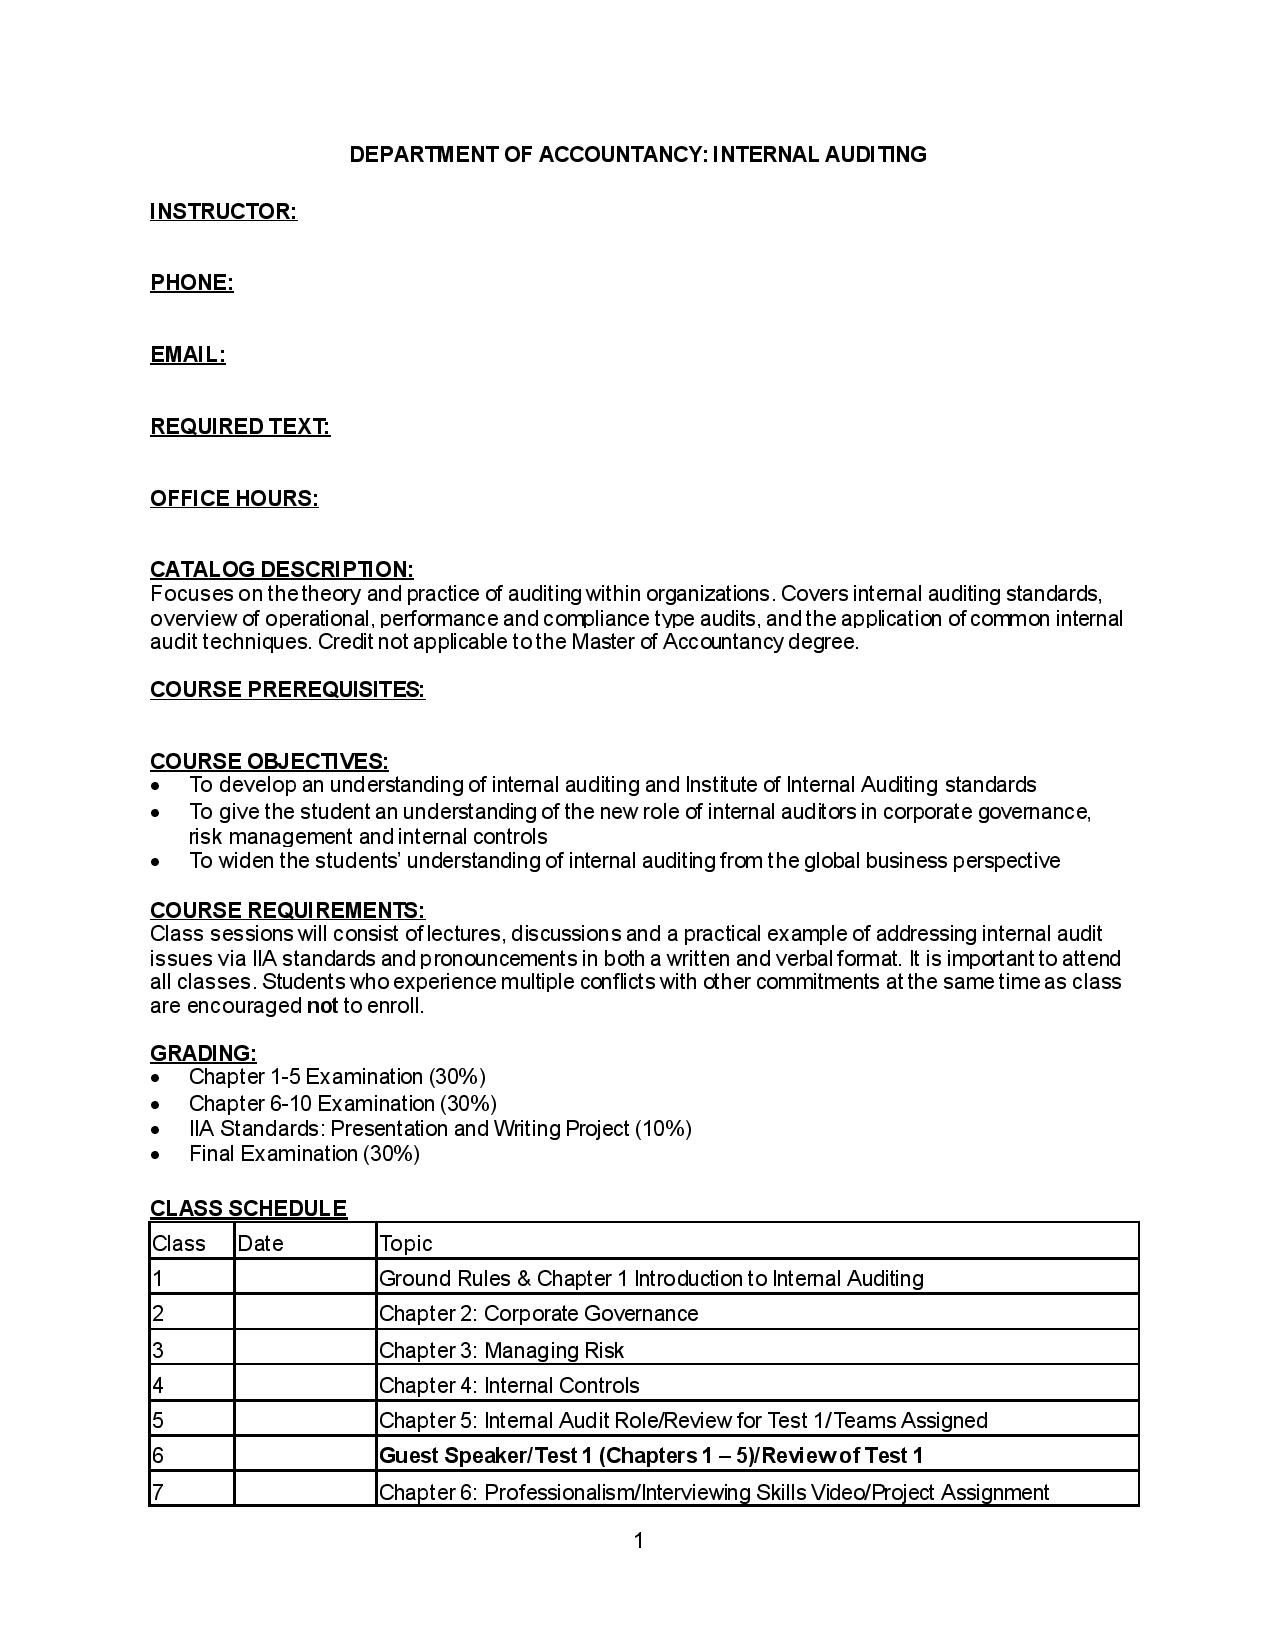 Screenshot of first page of Sample Syllabus_Department of Accountancy - Internal Auditing